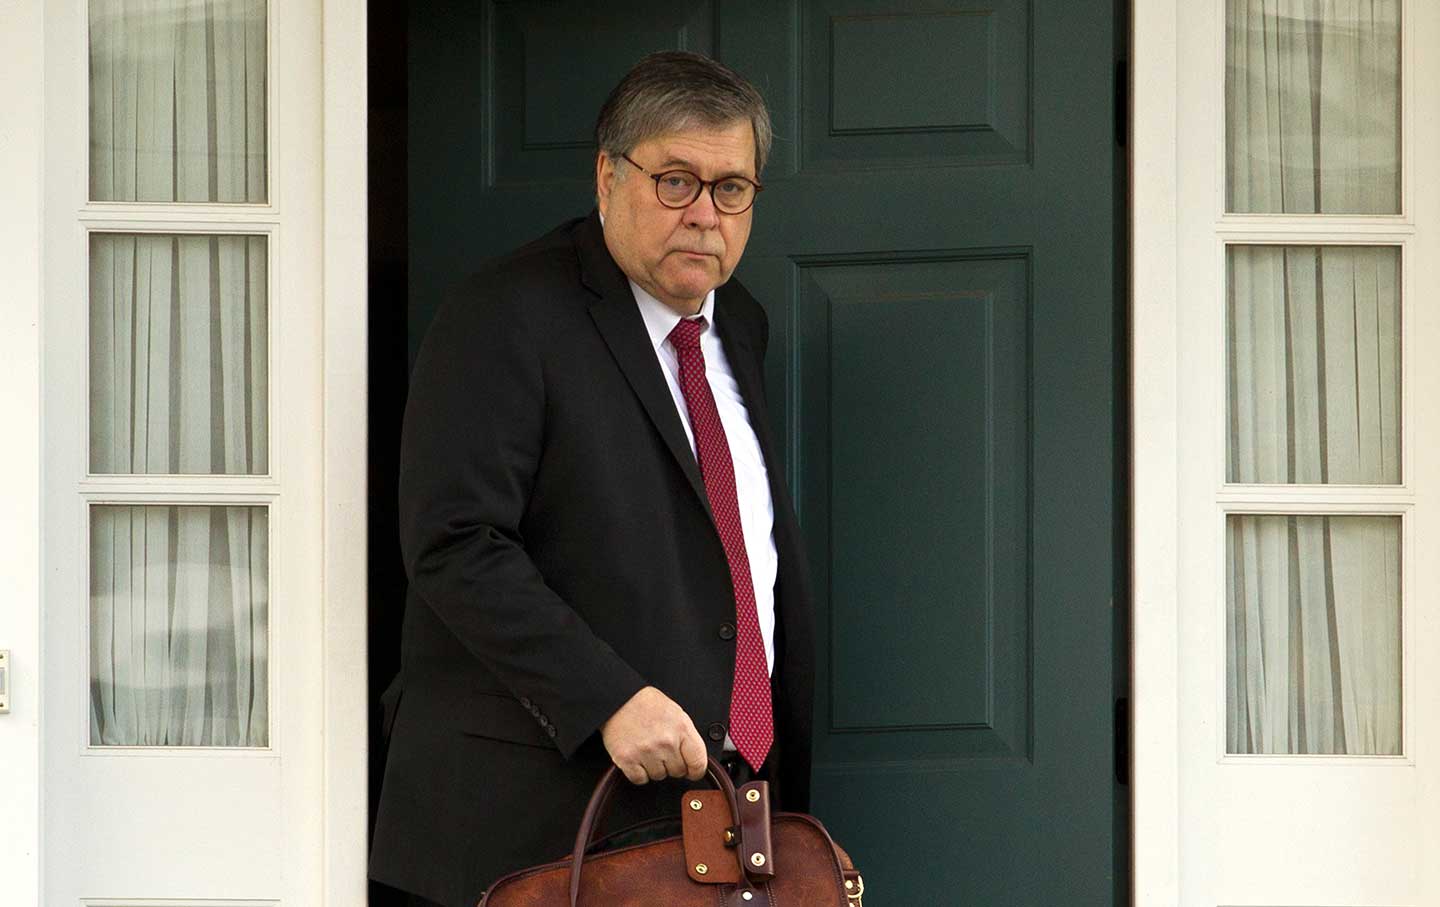 William Barr leaving home